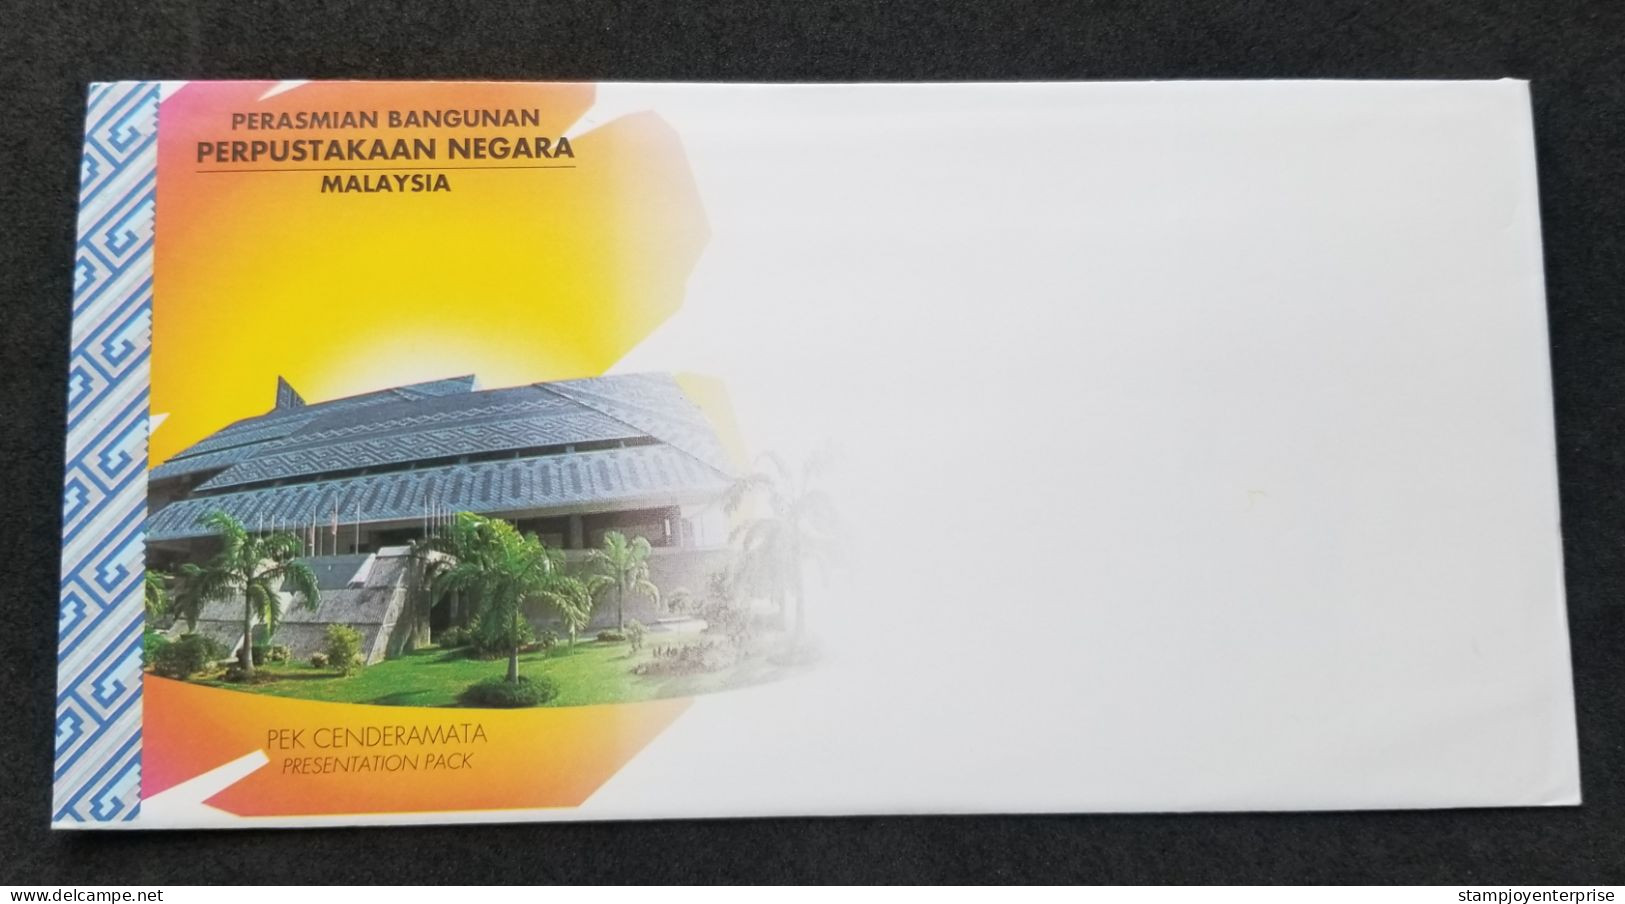 Malaysia Official Opening Of The National Library Building 1994 Computer Book (p. Pack) MNH - Maleisië (1964-...)